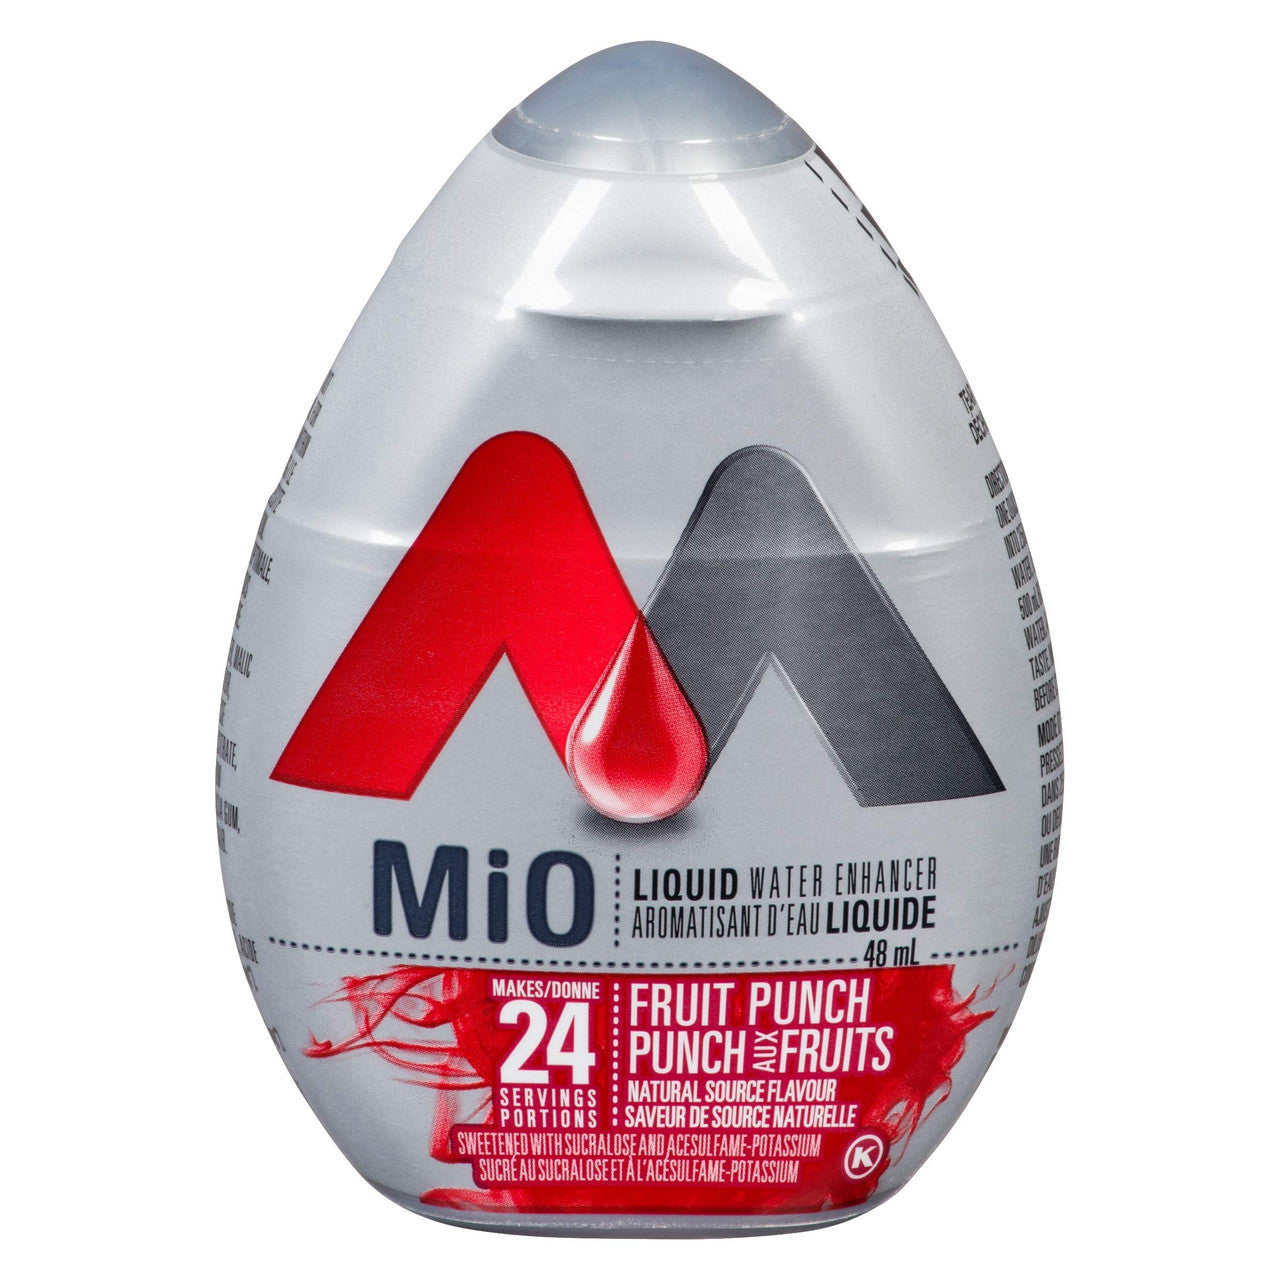 MiO Fruit Punch Liquid Water Enhancer, 48ml/1.62oz, (12pk) (Imported from Canada)